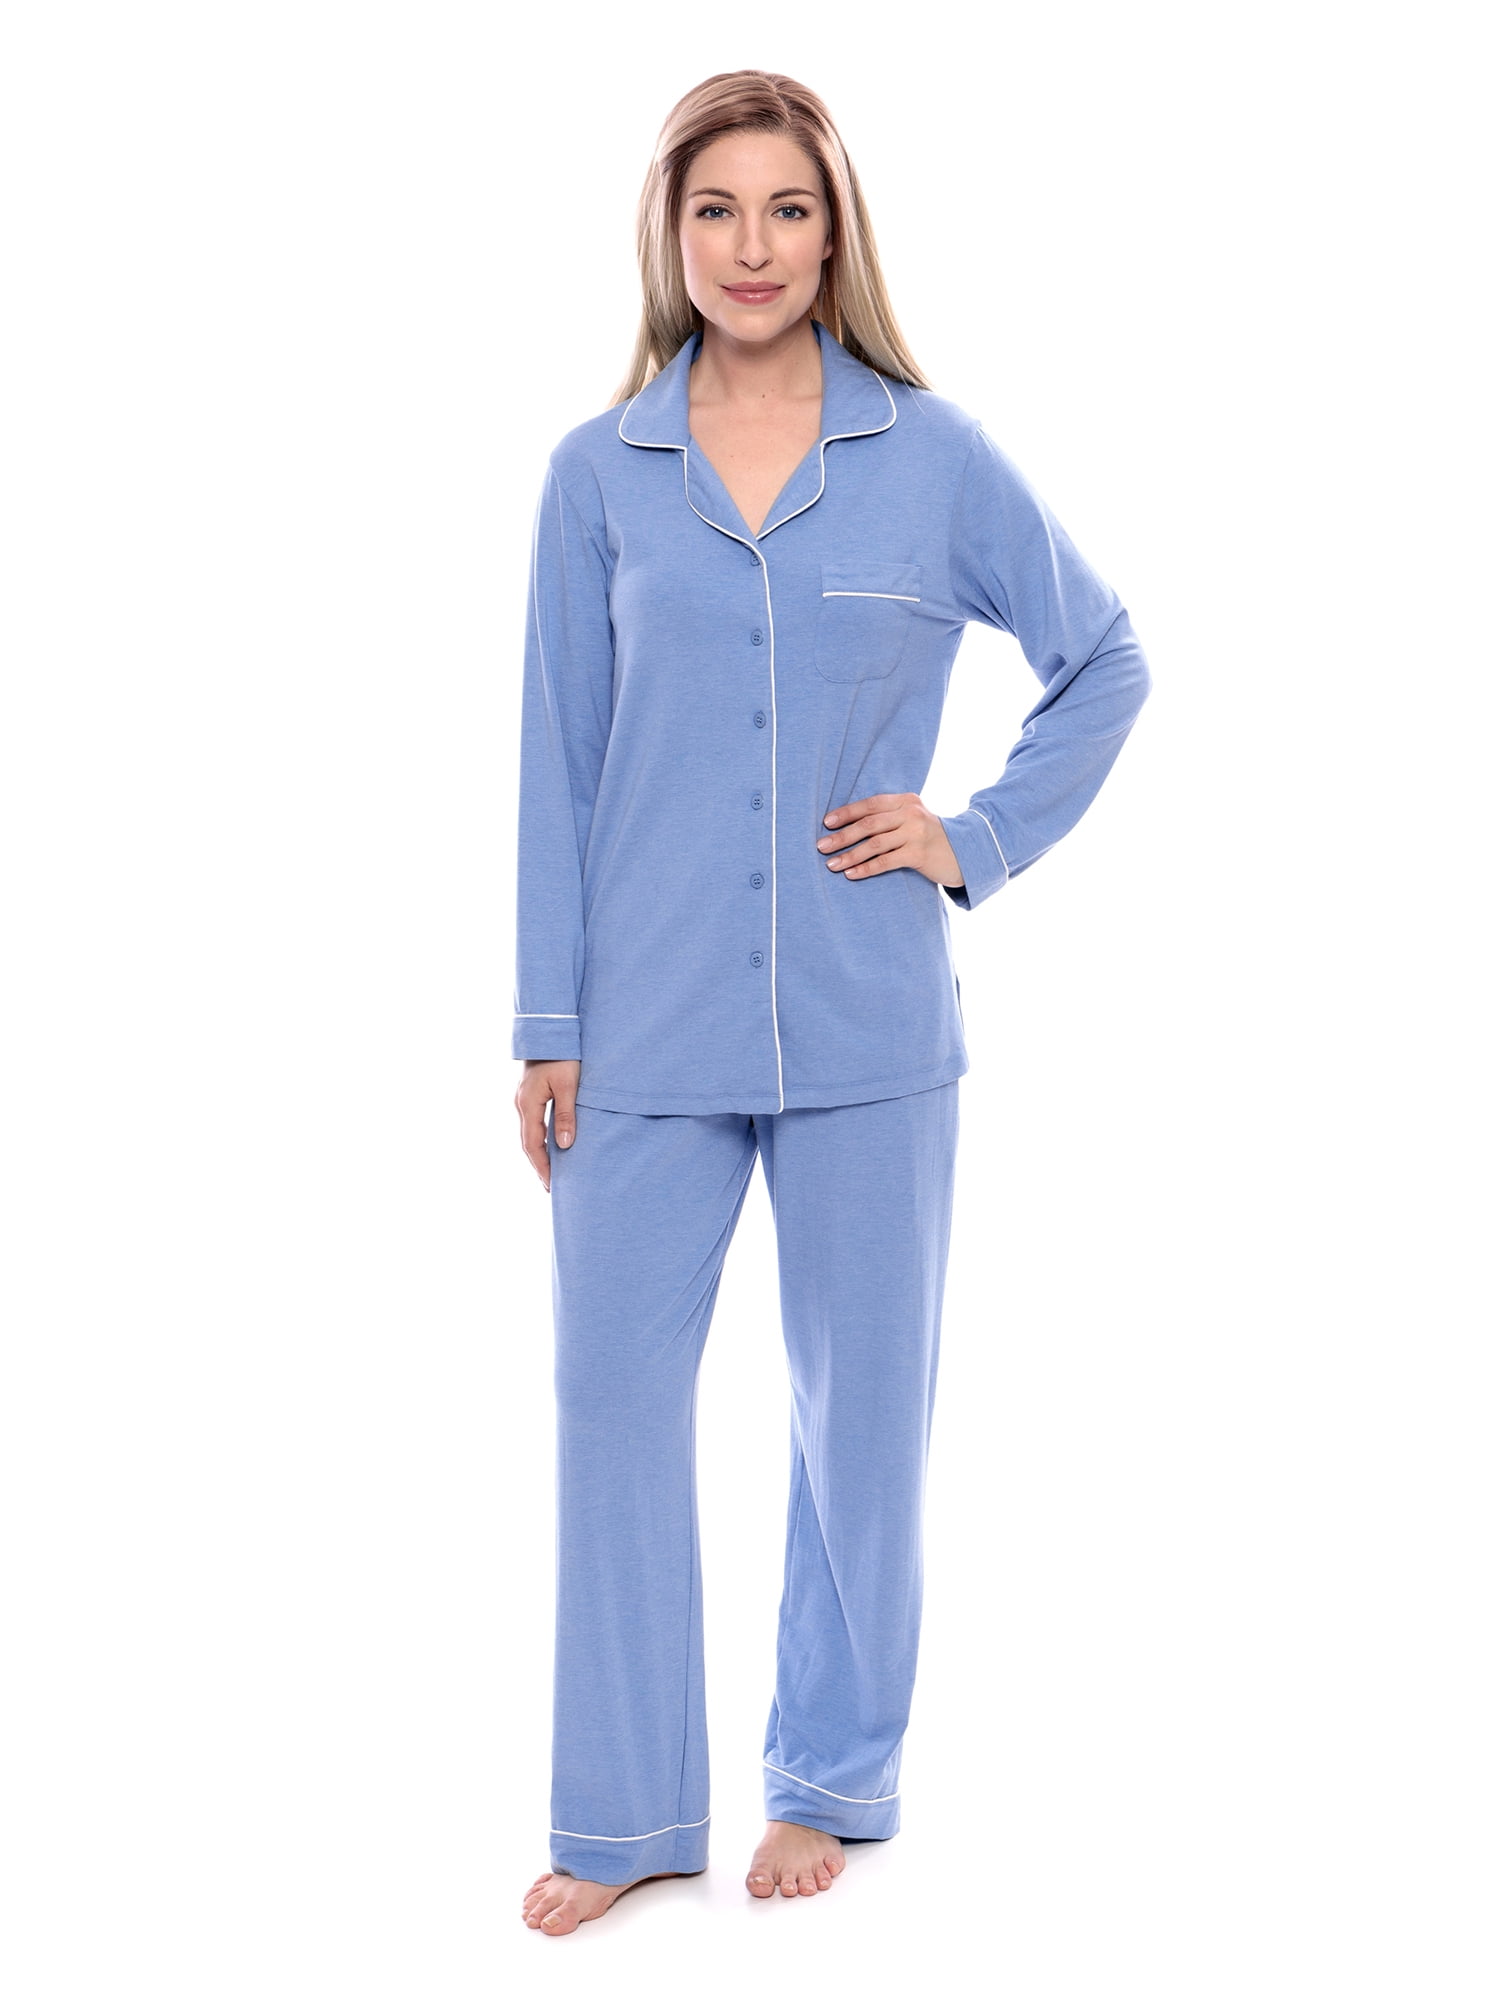 Women's Button-Up Long Sleeve Pajamas - Sleepwear set by Texere ...